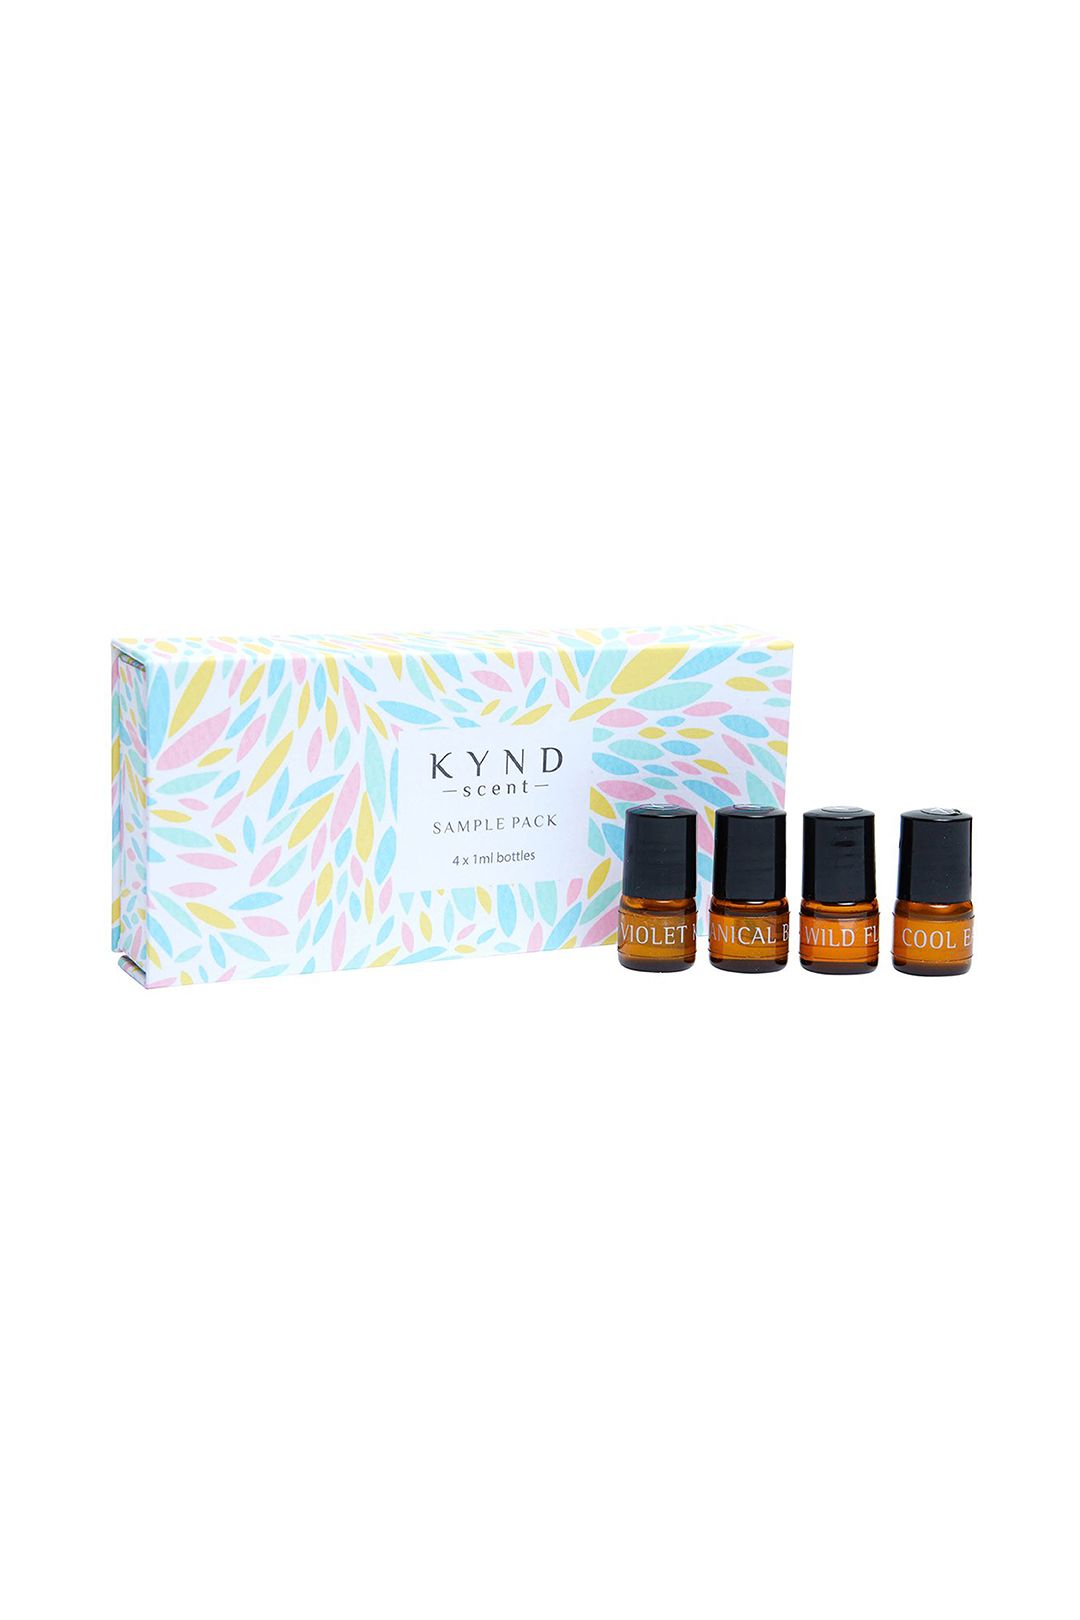 kynd-scent-small-sample-pack-product-1